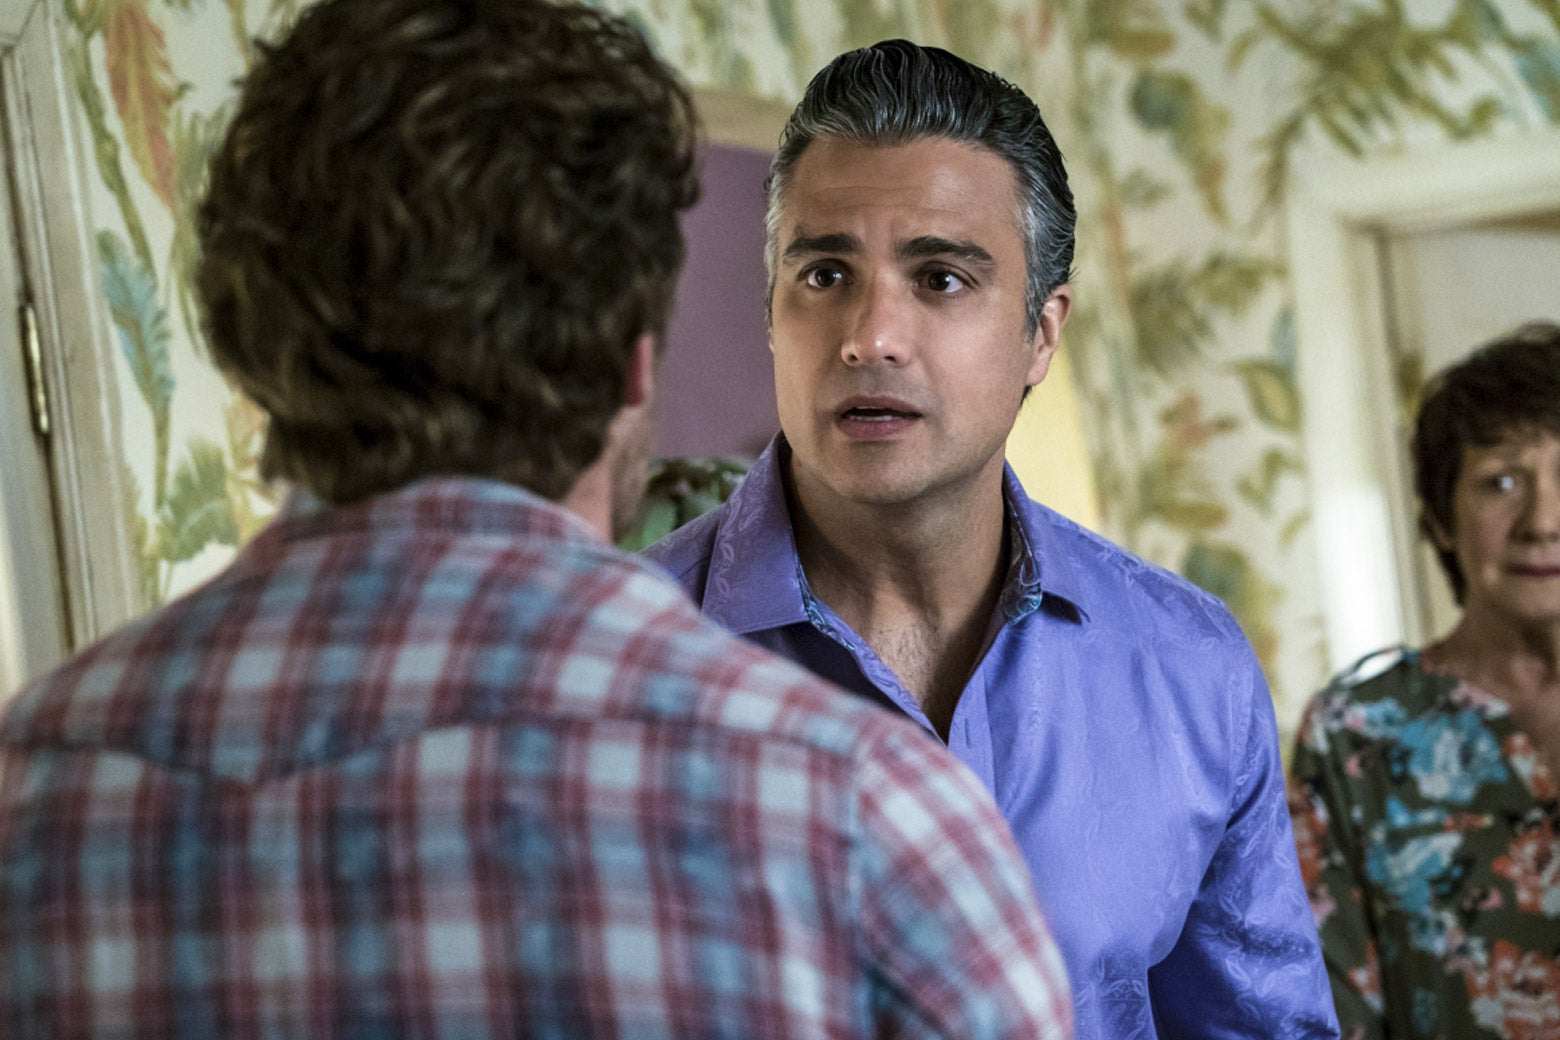 In a still from Jane the Virgin, Rogelio and Alba look upset, facing Jason.